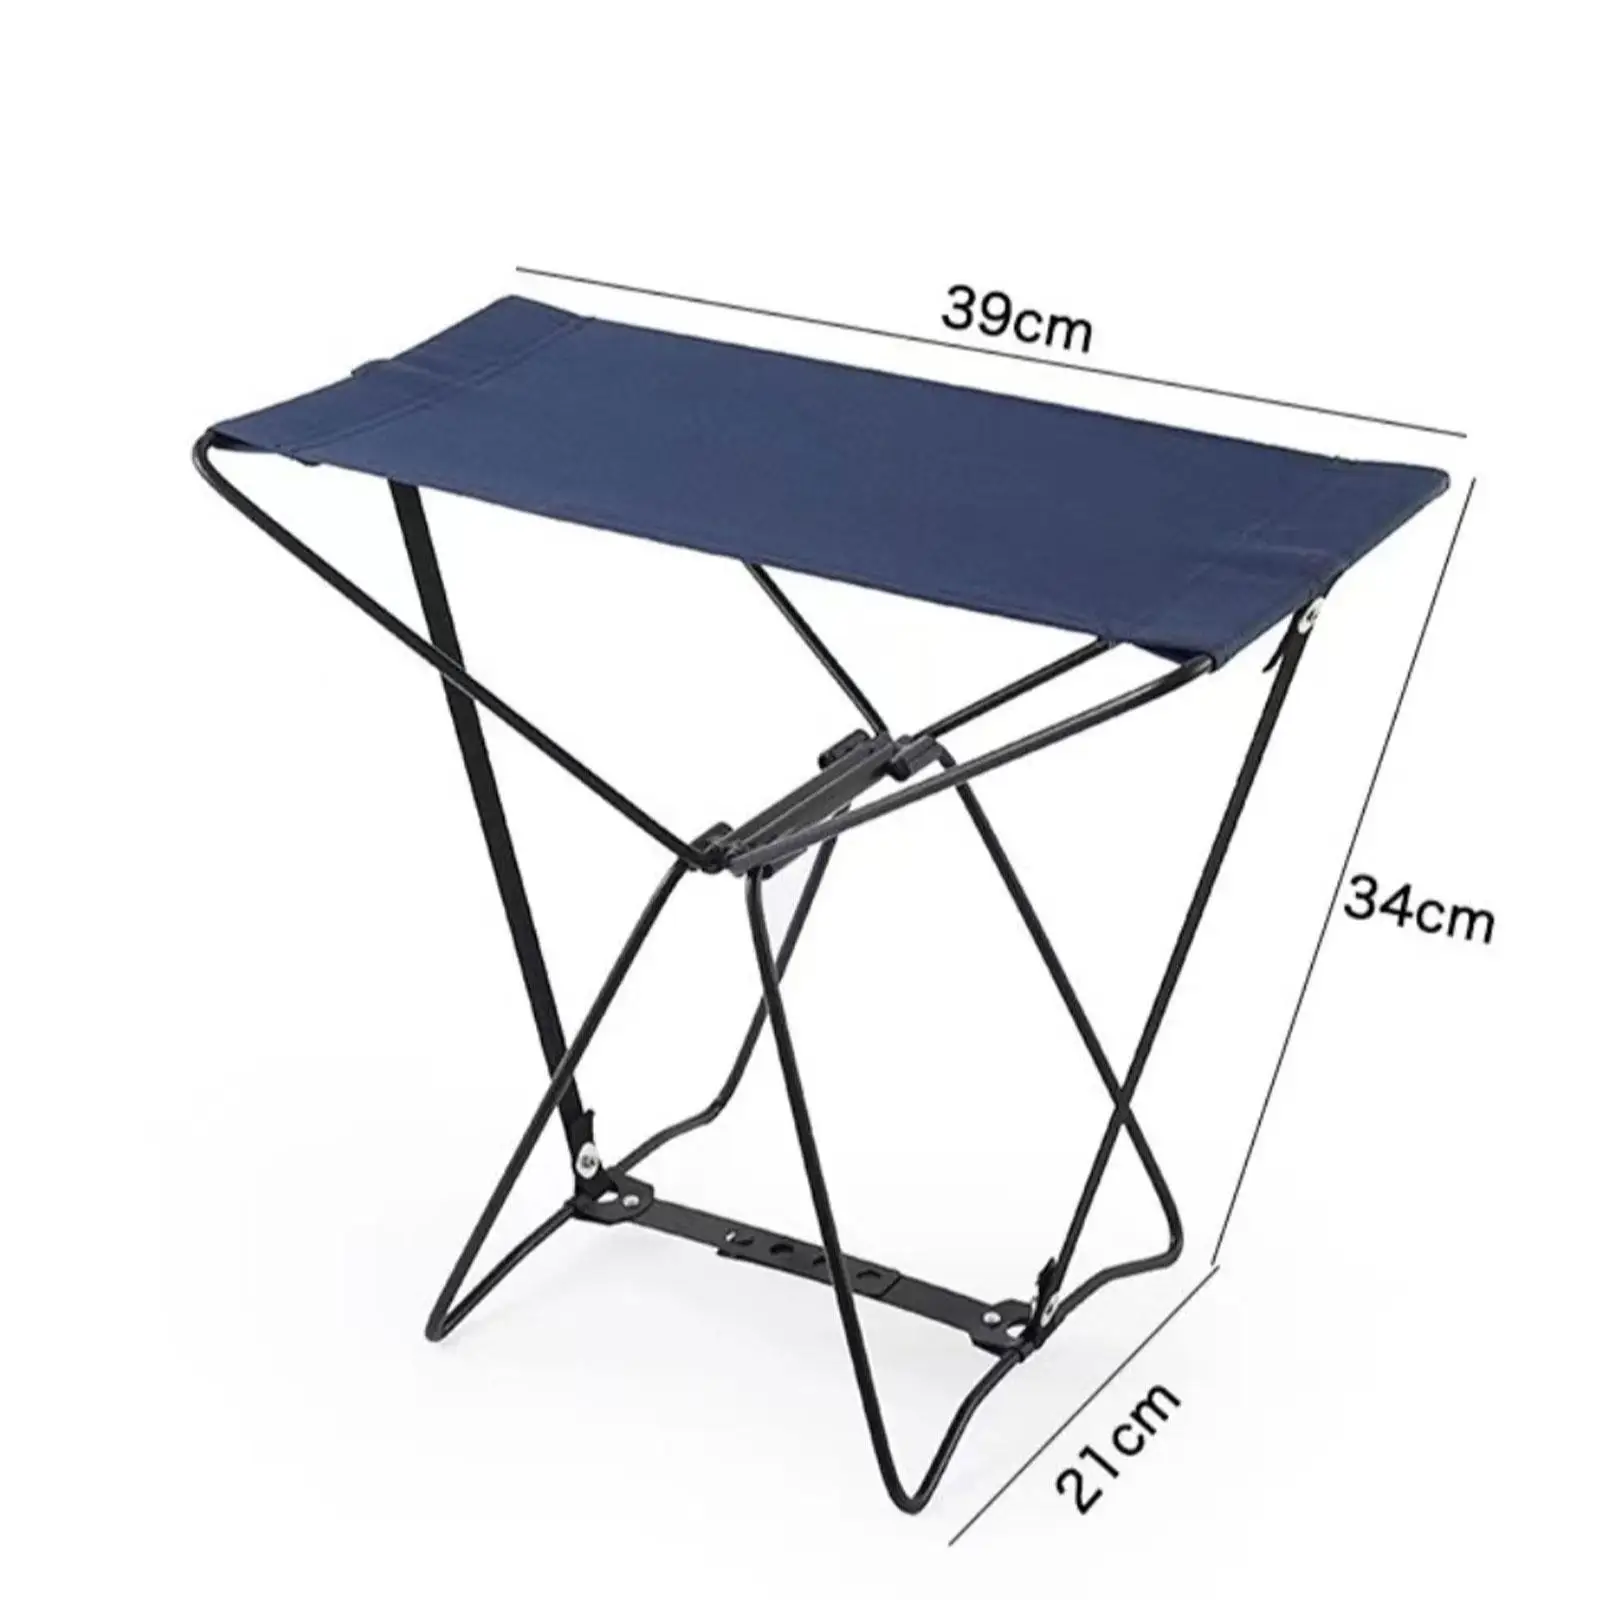 Folding Stool Compact Recliner Foot Rest Chair Folding Camp Stool Collapsible Stool for Patio Backyard Travel Fishing Picnic